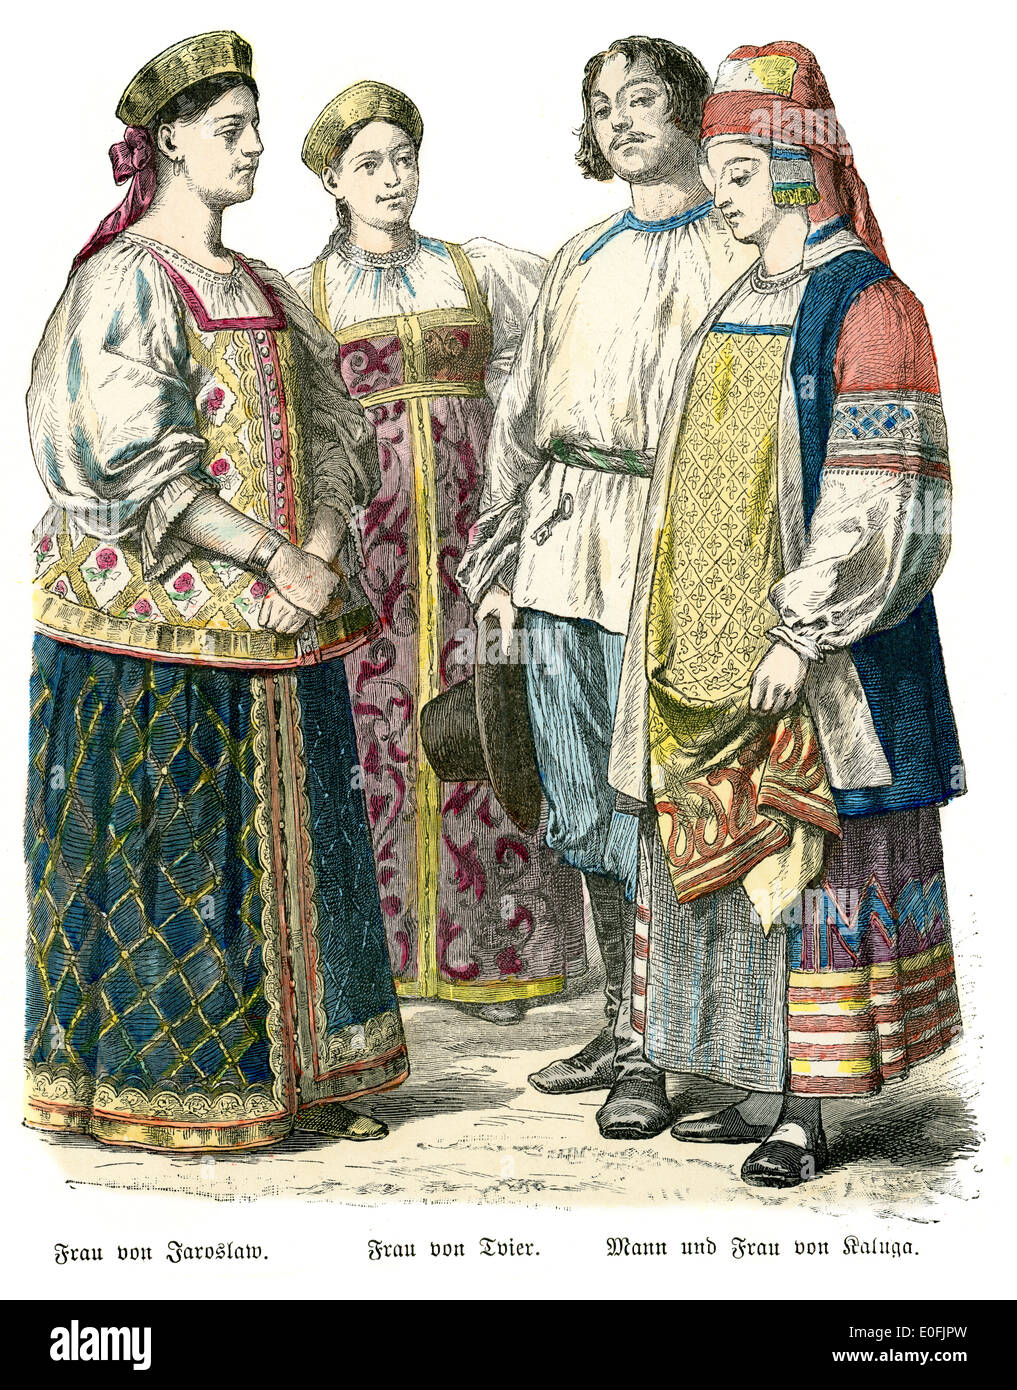 Traditional costumes of Russia, 19th Century. Woman of Jaroslaw, Woman of Tver, and man and woman of Kaluga. Stock Photo